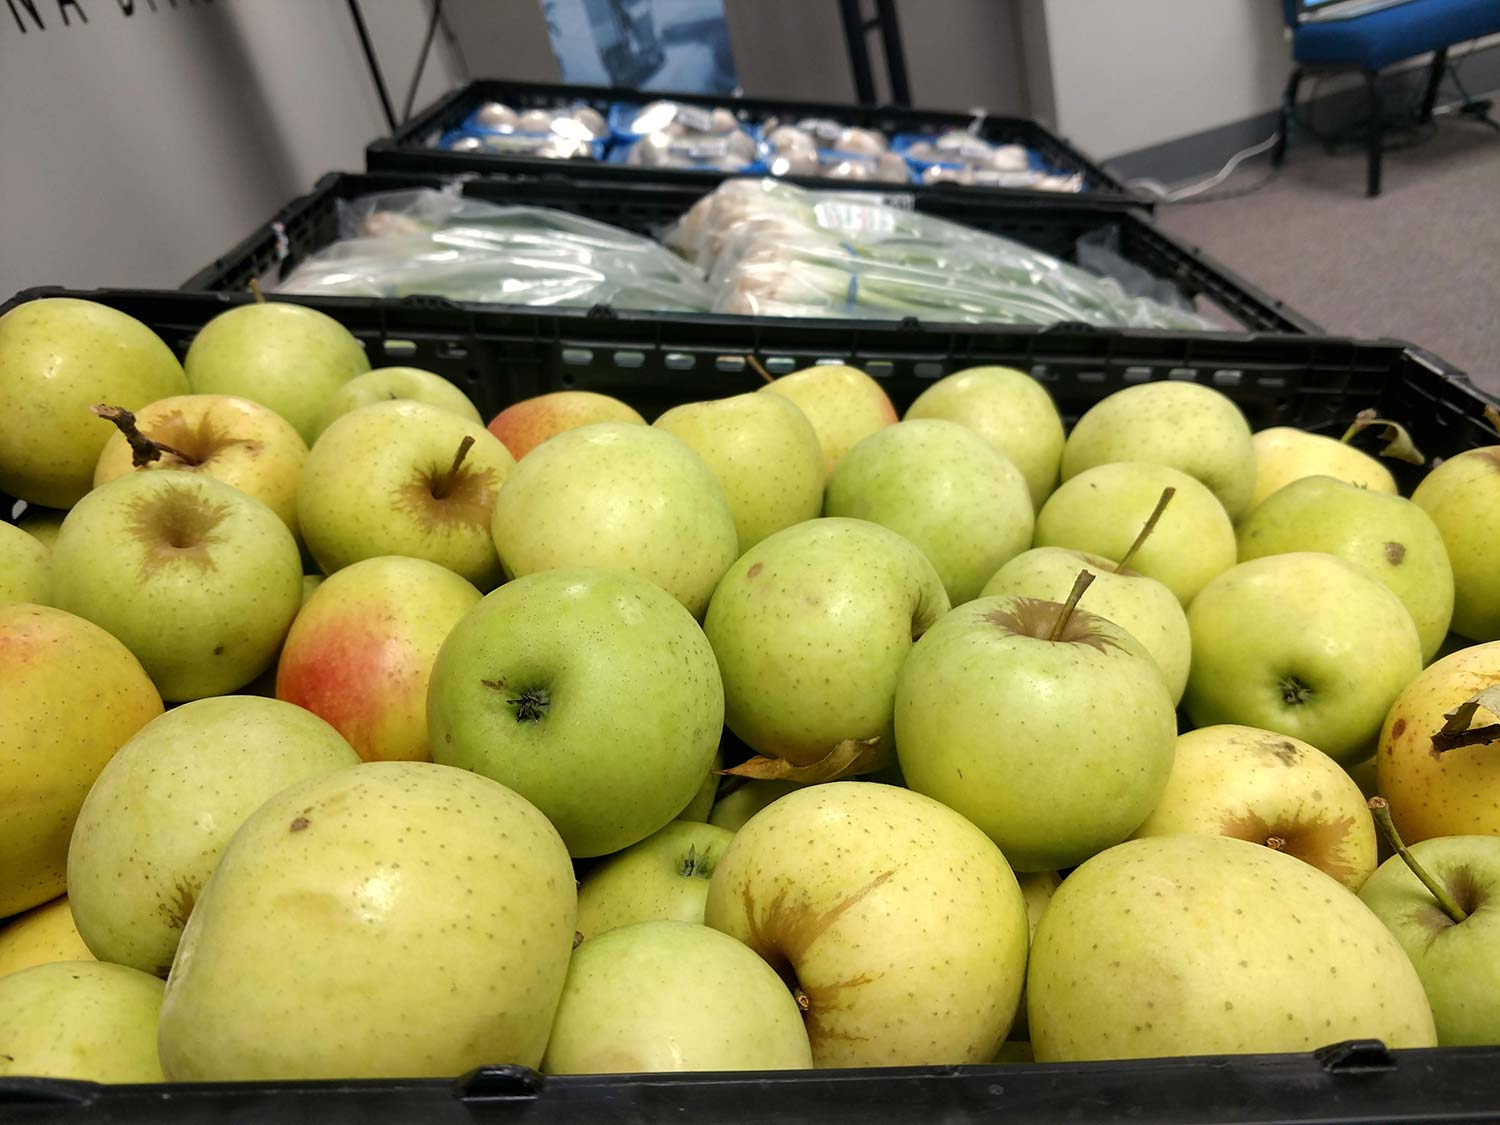 The Food Drop initiative saves fresh apples like these from landfills. Provided by Alex Sindorf, Indy Hunger Network 